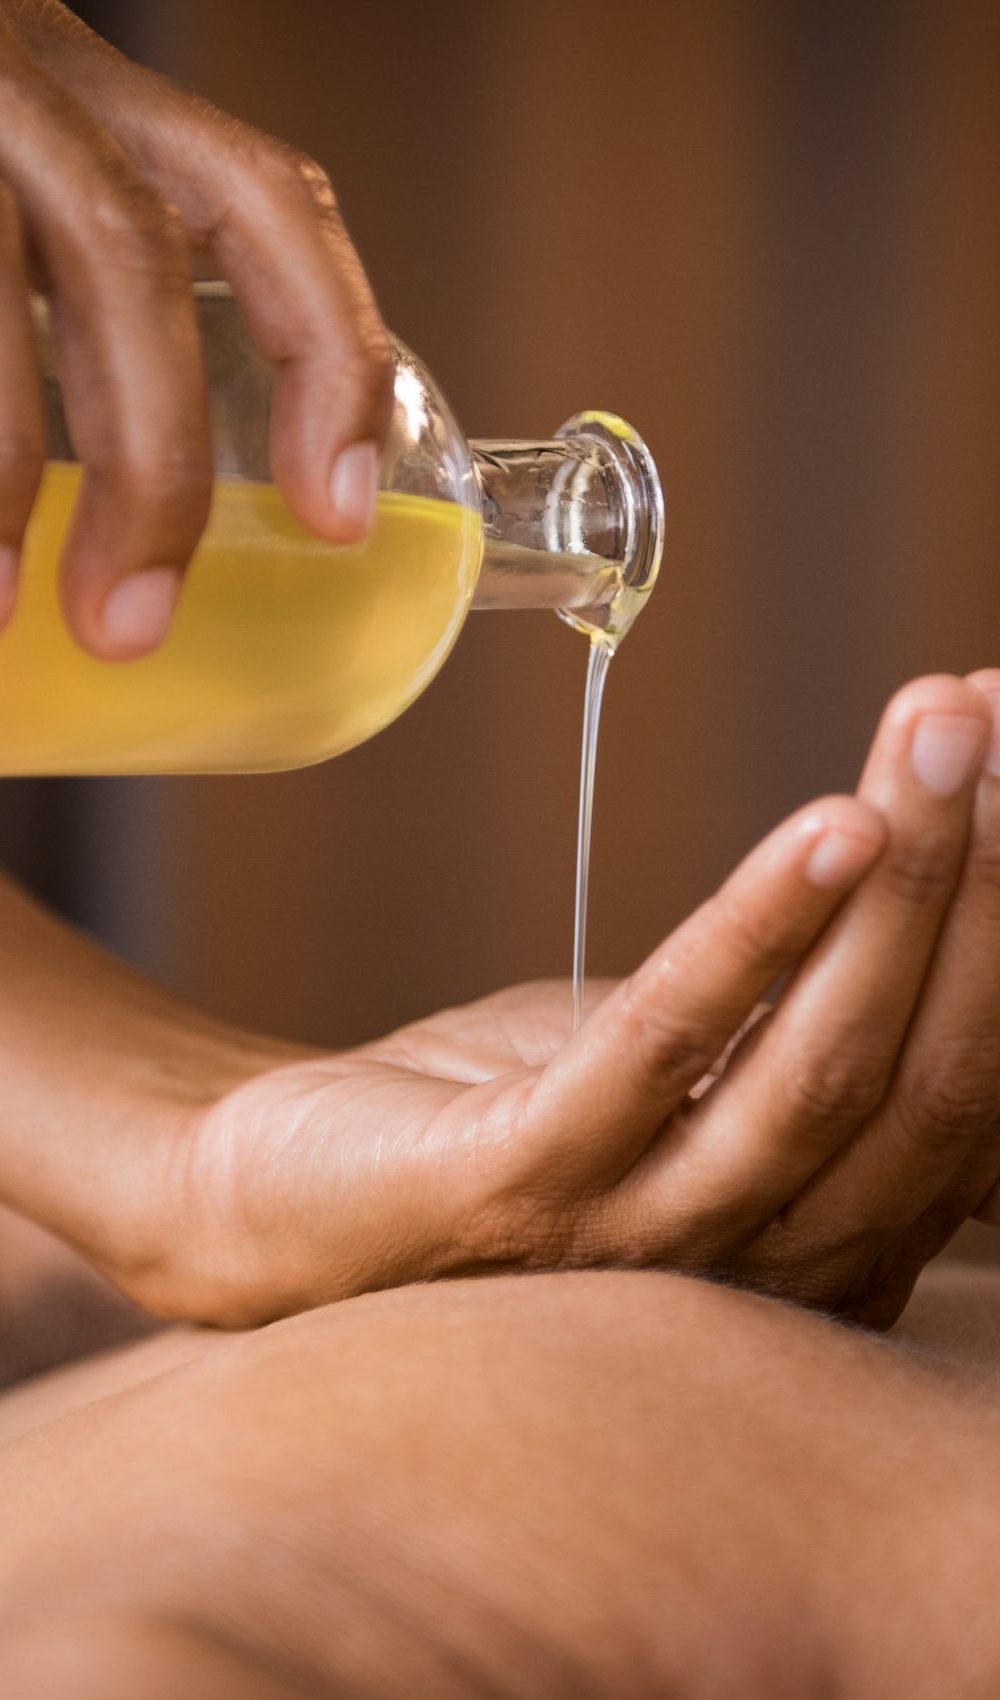 Closeup of masseur hands pouring aroma oil on woman back. Masseuse prepare to do oriental spa procedure for relaxing treatment. Therapist doing aromatherapy oil massage on woman body.